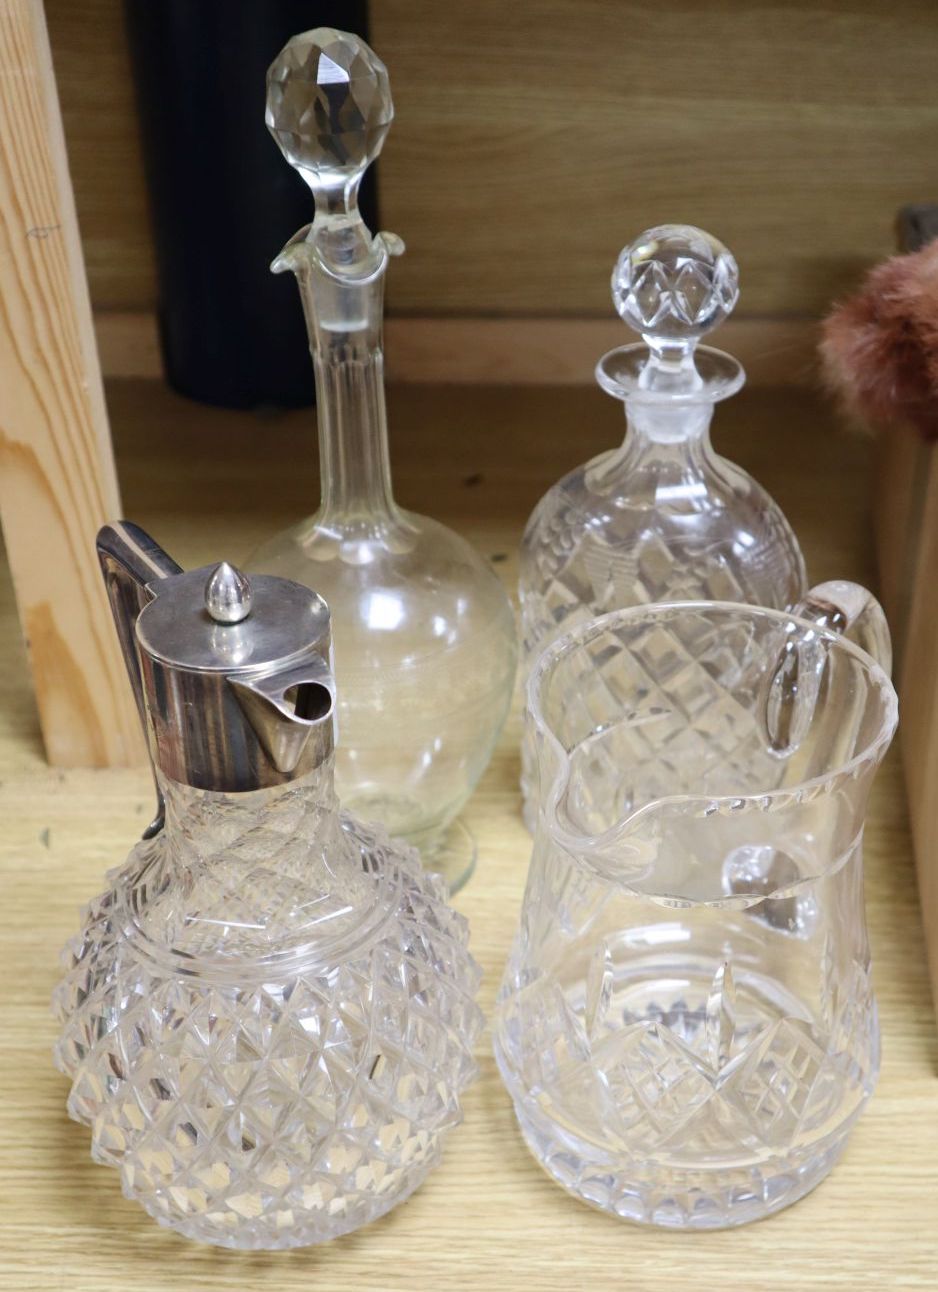 An early 20th century Australian white metal mounted glass claret jug, by Brunkhorst of Adelaide, glass water jug, decanter and carafe